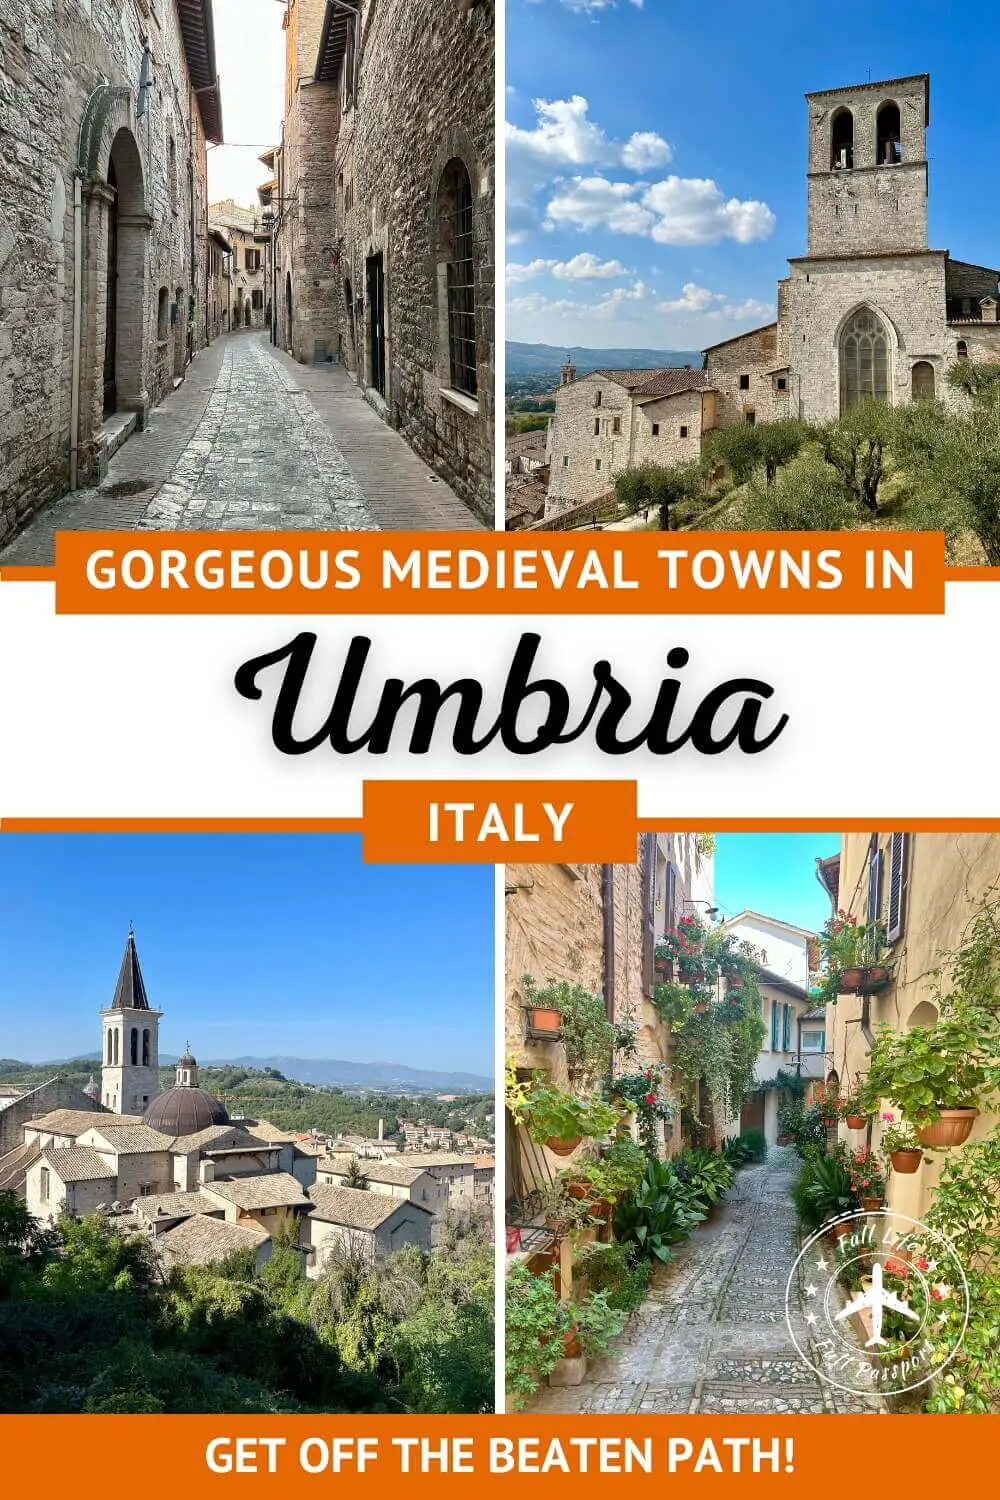 Four Gorgeous Medieval Towns You Should Visit in Umbria, Italy